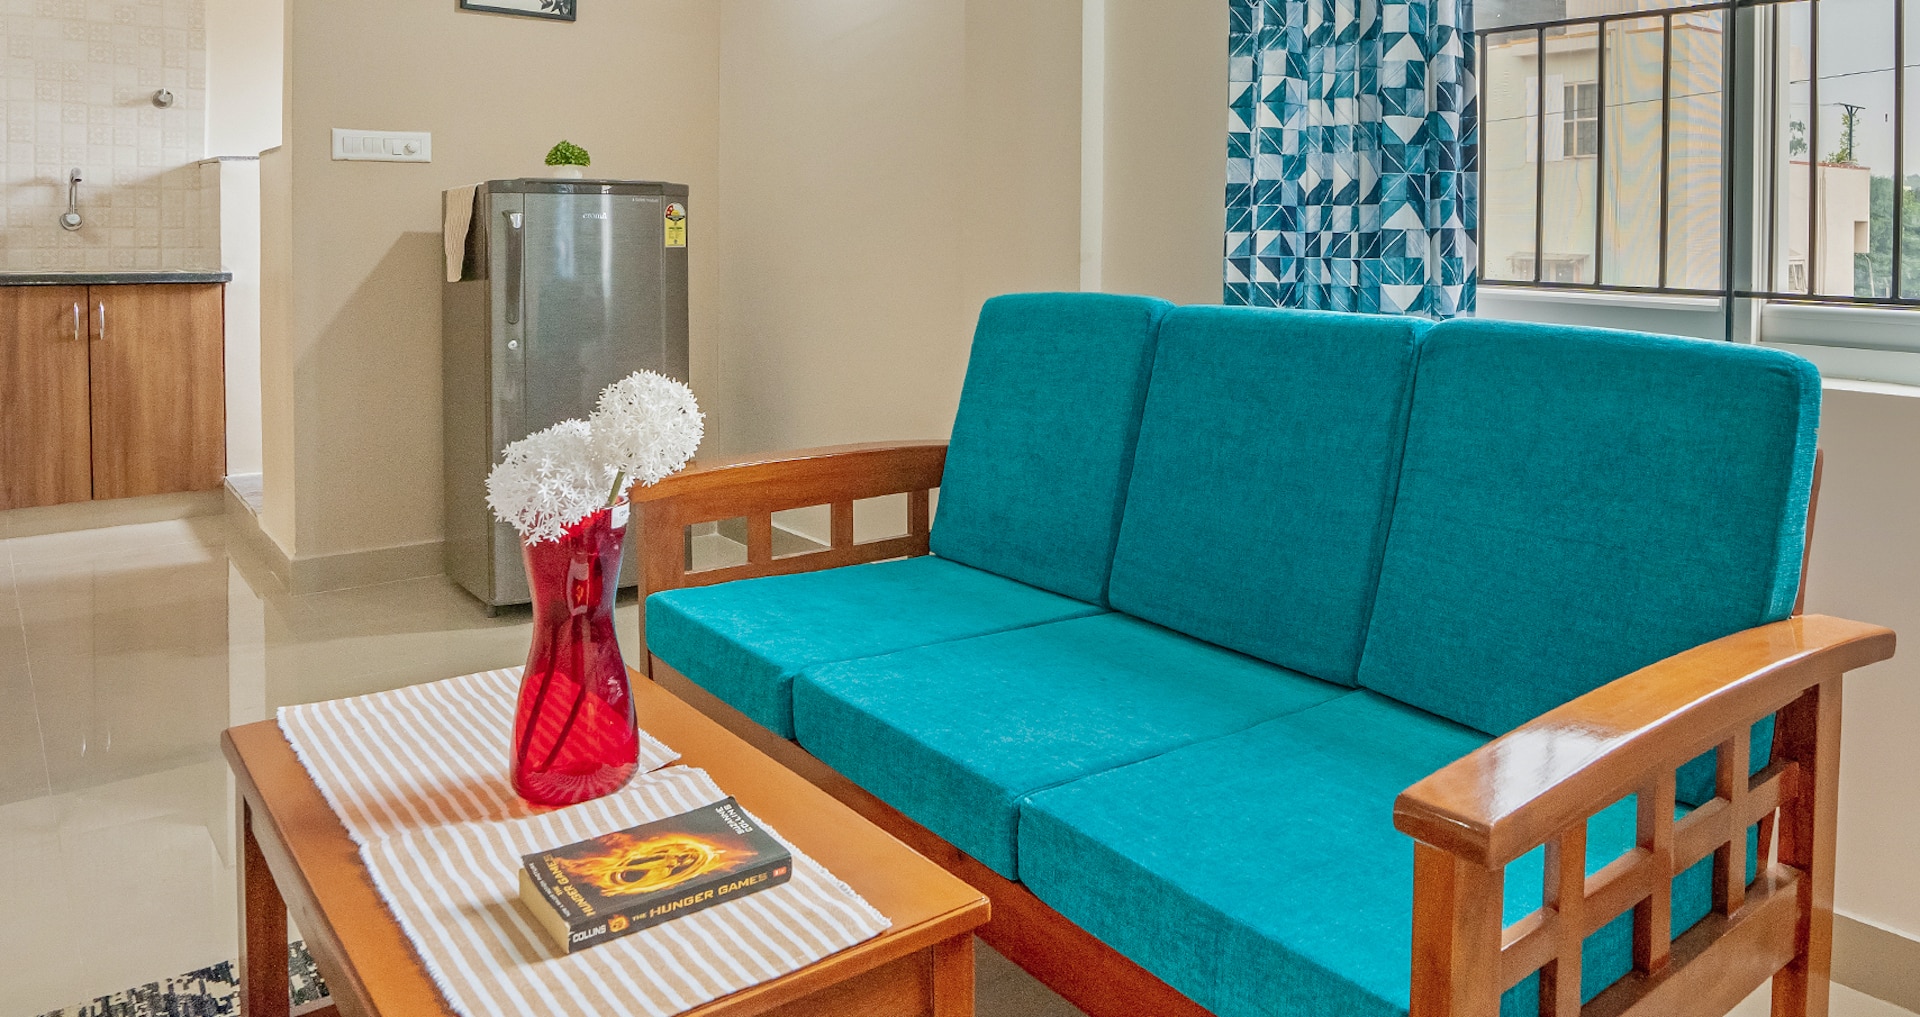 Coliving operator Settl. to add 2,000 beds in India